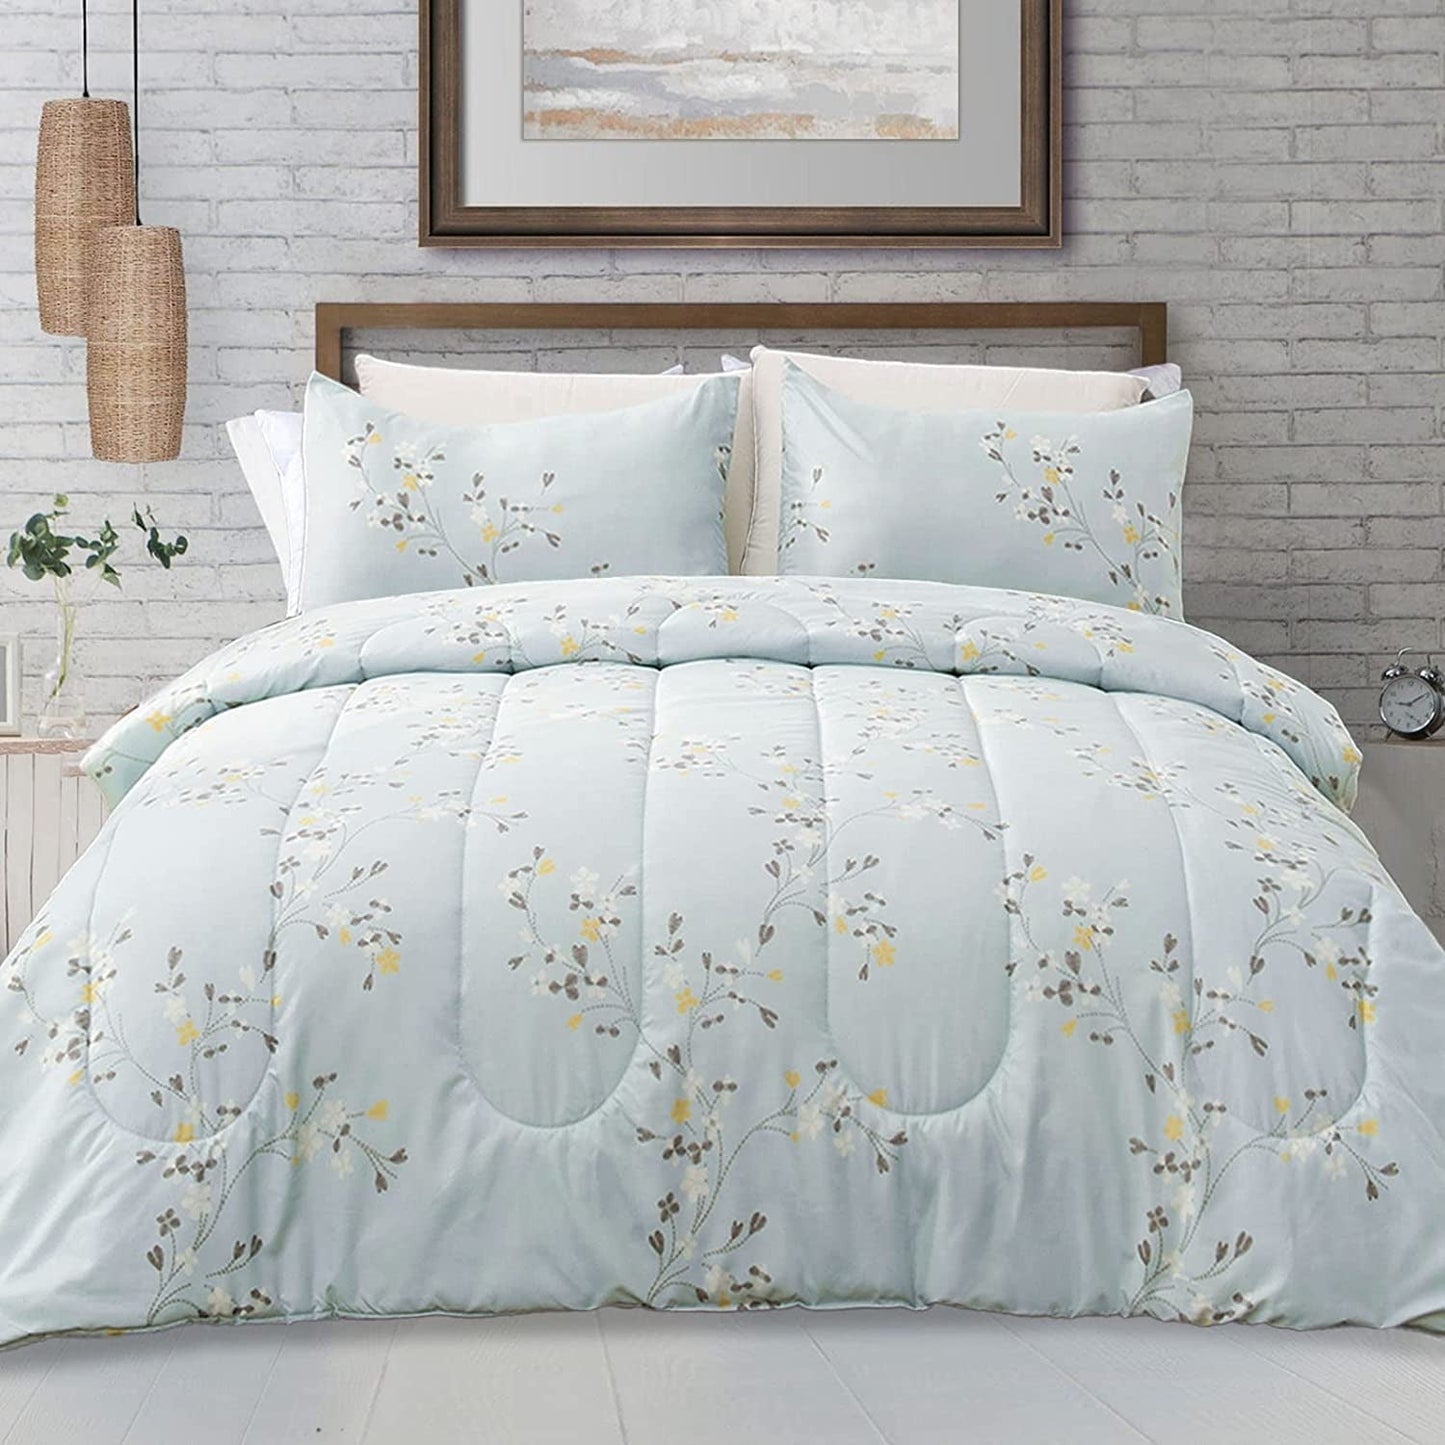 Exclusivo Mezcla 3-Piece Floral King Size Comforter Set, Microfiber Bedding Down Alternative Comforter for All Seasons with 2 Pillow Shams, Baby Blue